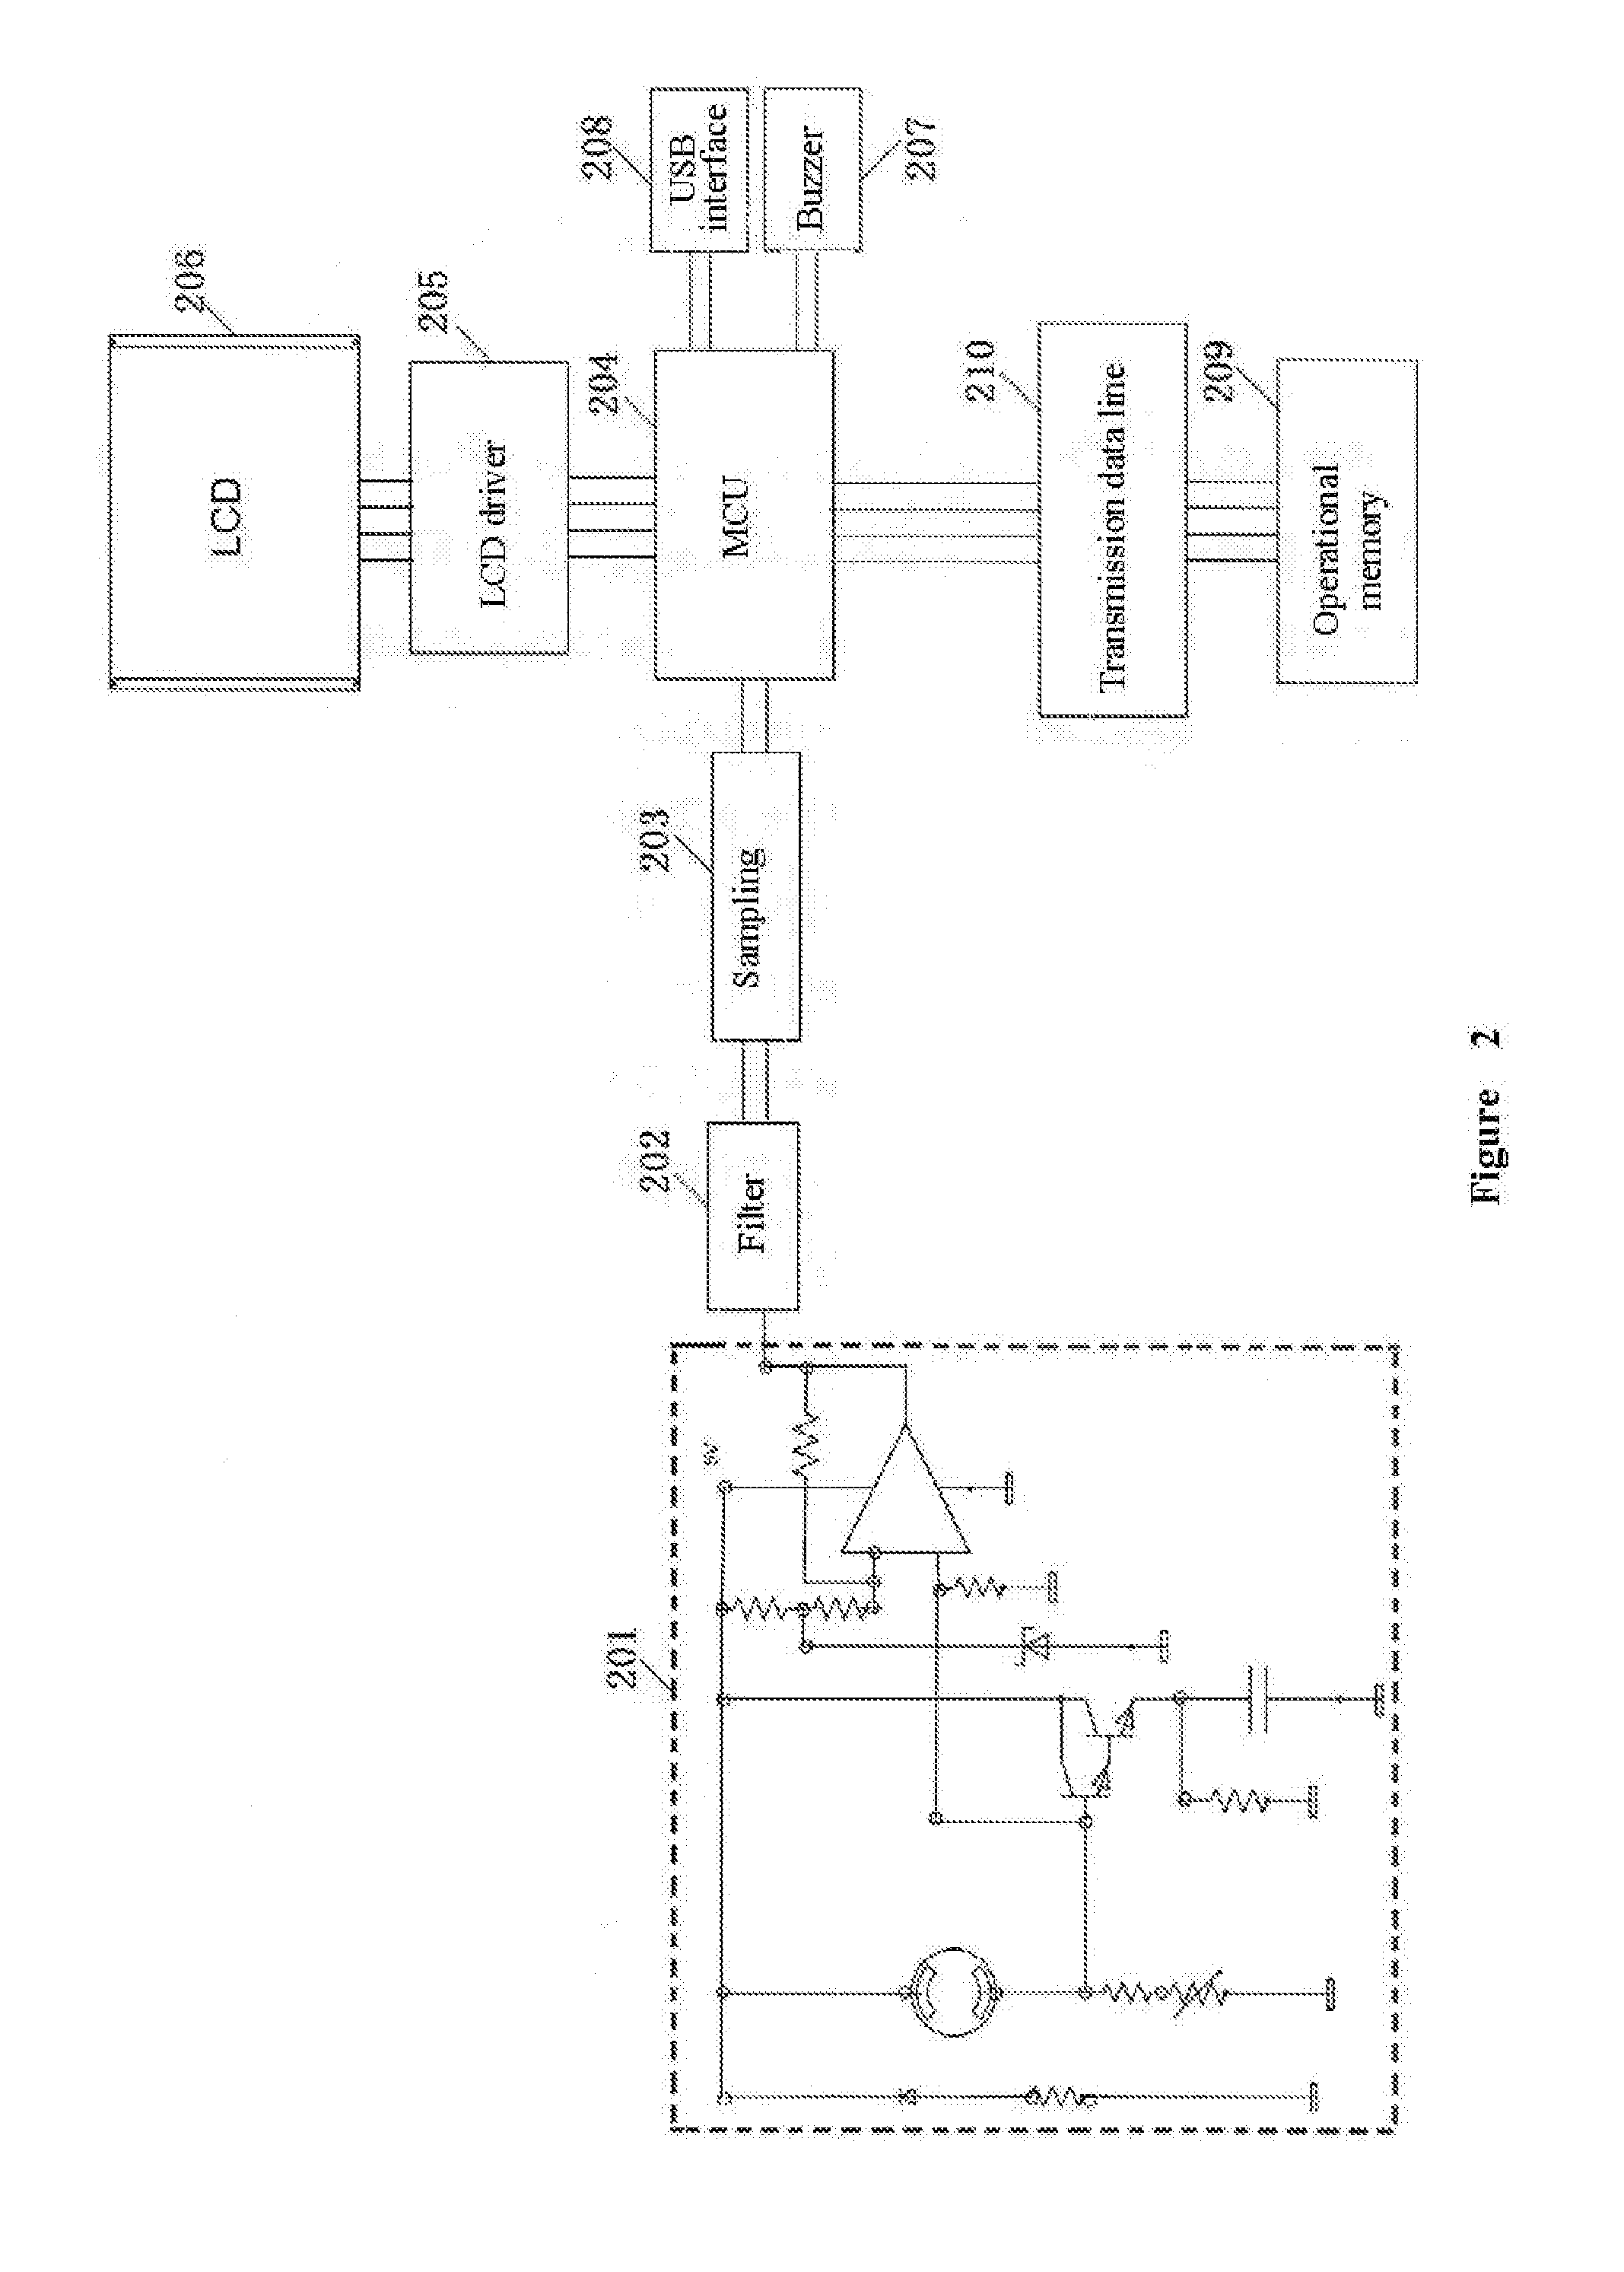 Breath Alcohol Analyser And A Method Of Determining Whether A Driver Is In A Condition To Drive